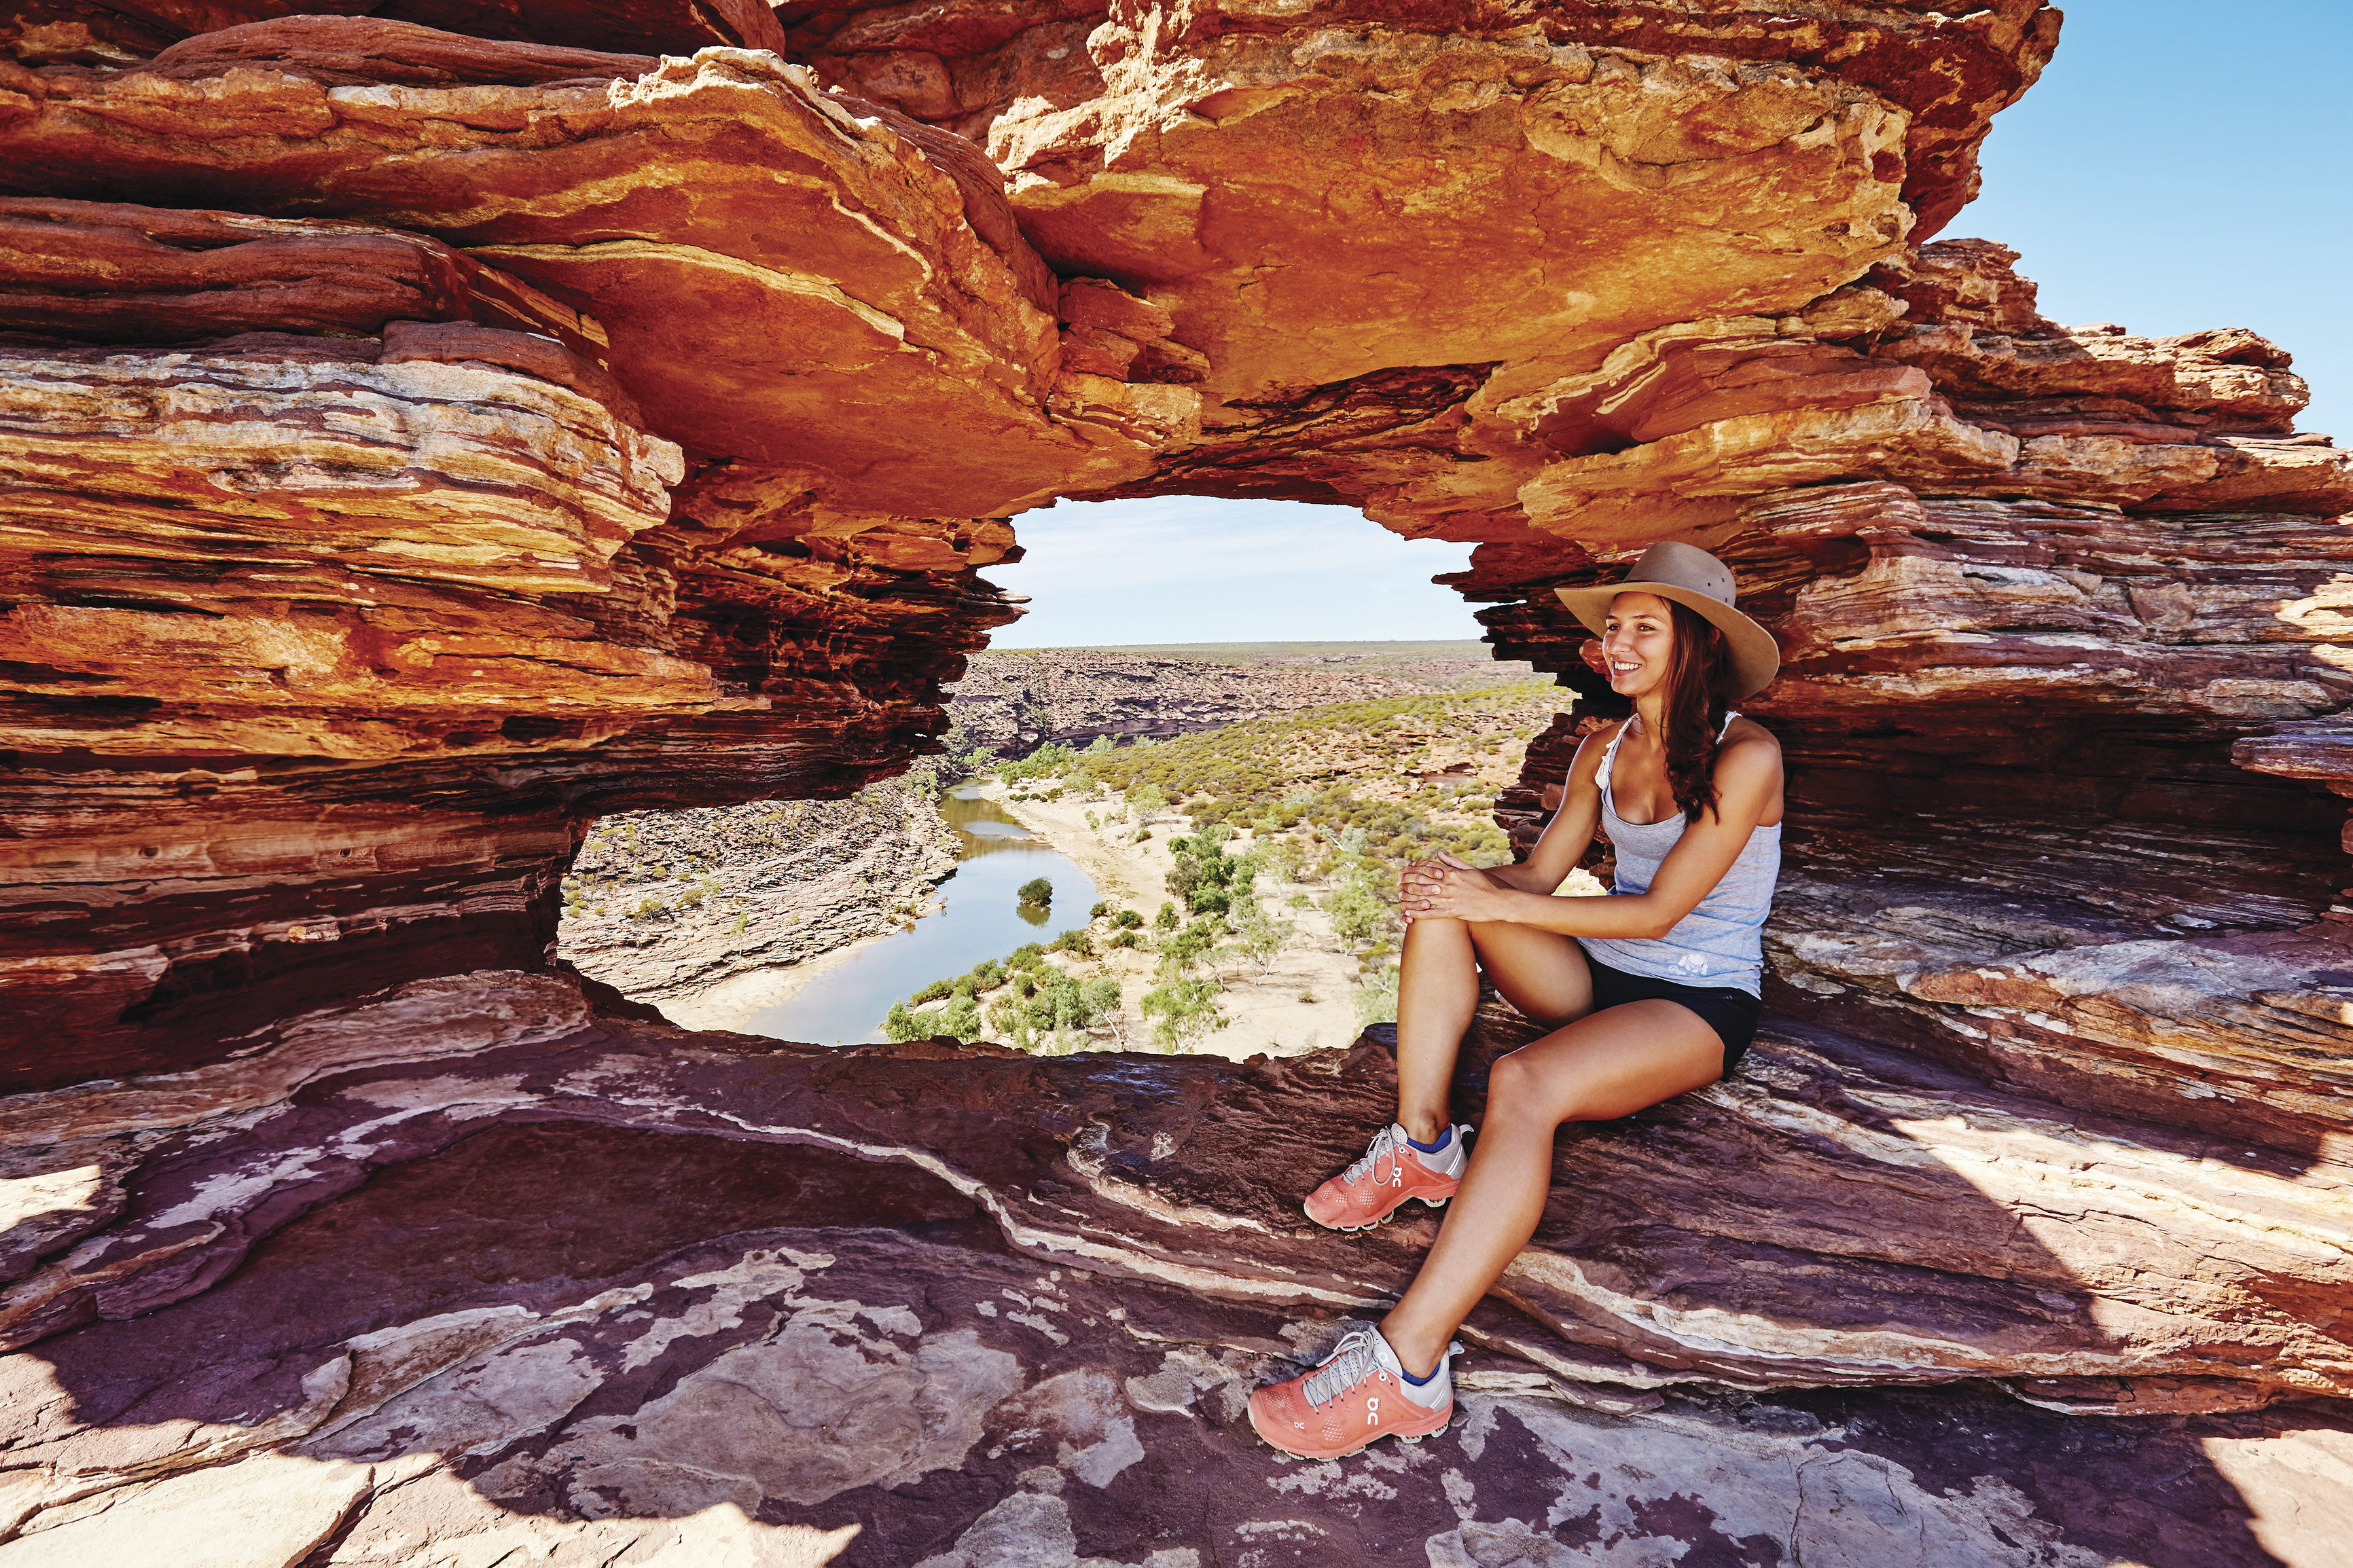 6-Day Perth to Exmouth Coral Coaster Tour (Private Single Room): Pinnacles Desert | Kalbarri National Park from the Skywalk | Ningaloo Reef at Coral Bay | 